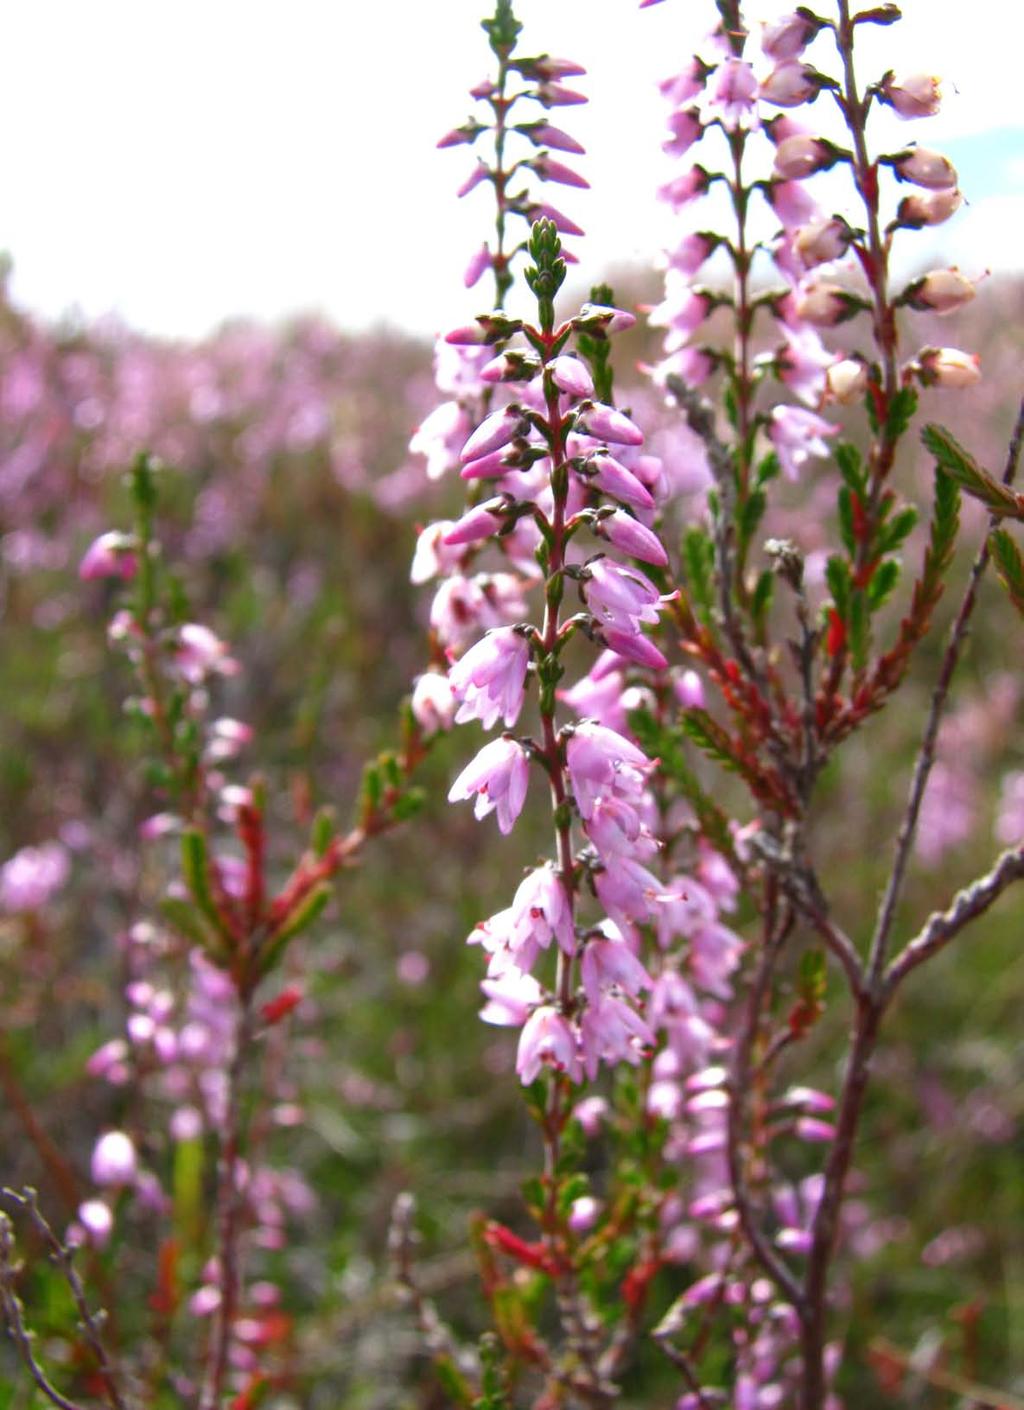 Heather Introduced from Europe Smothers small native